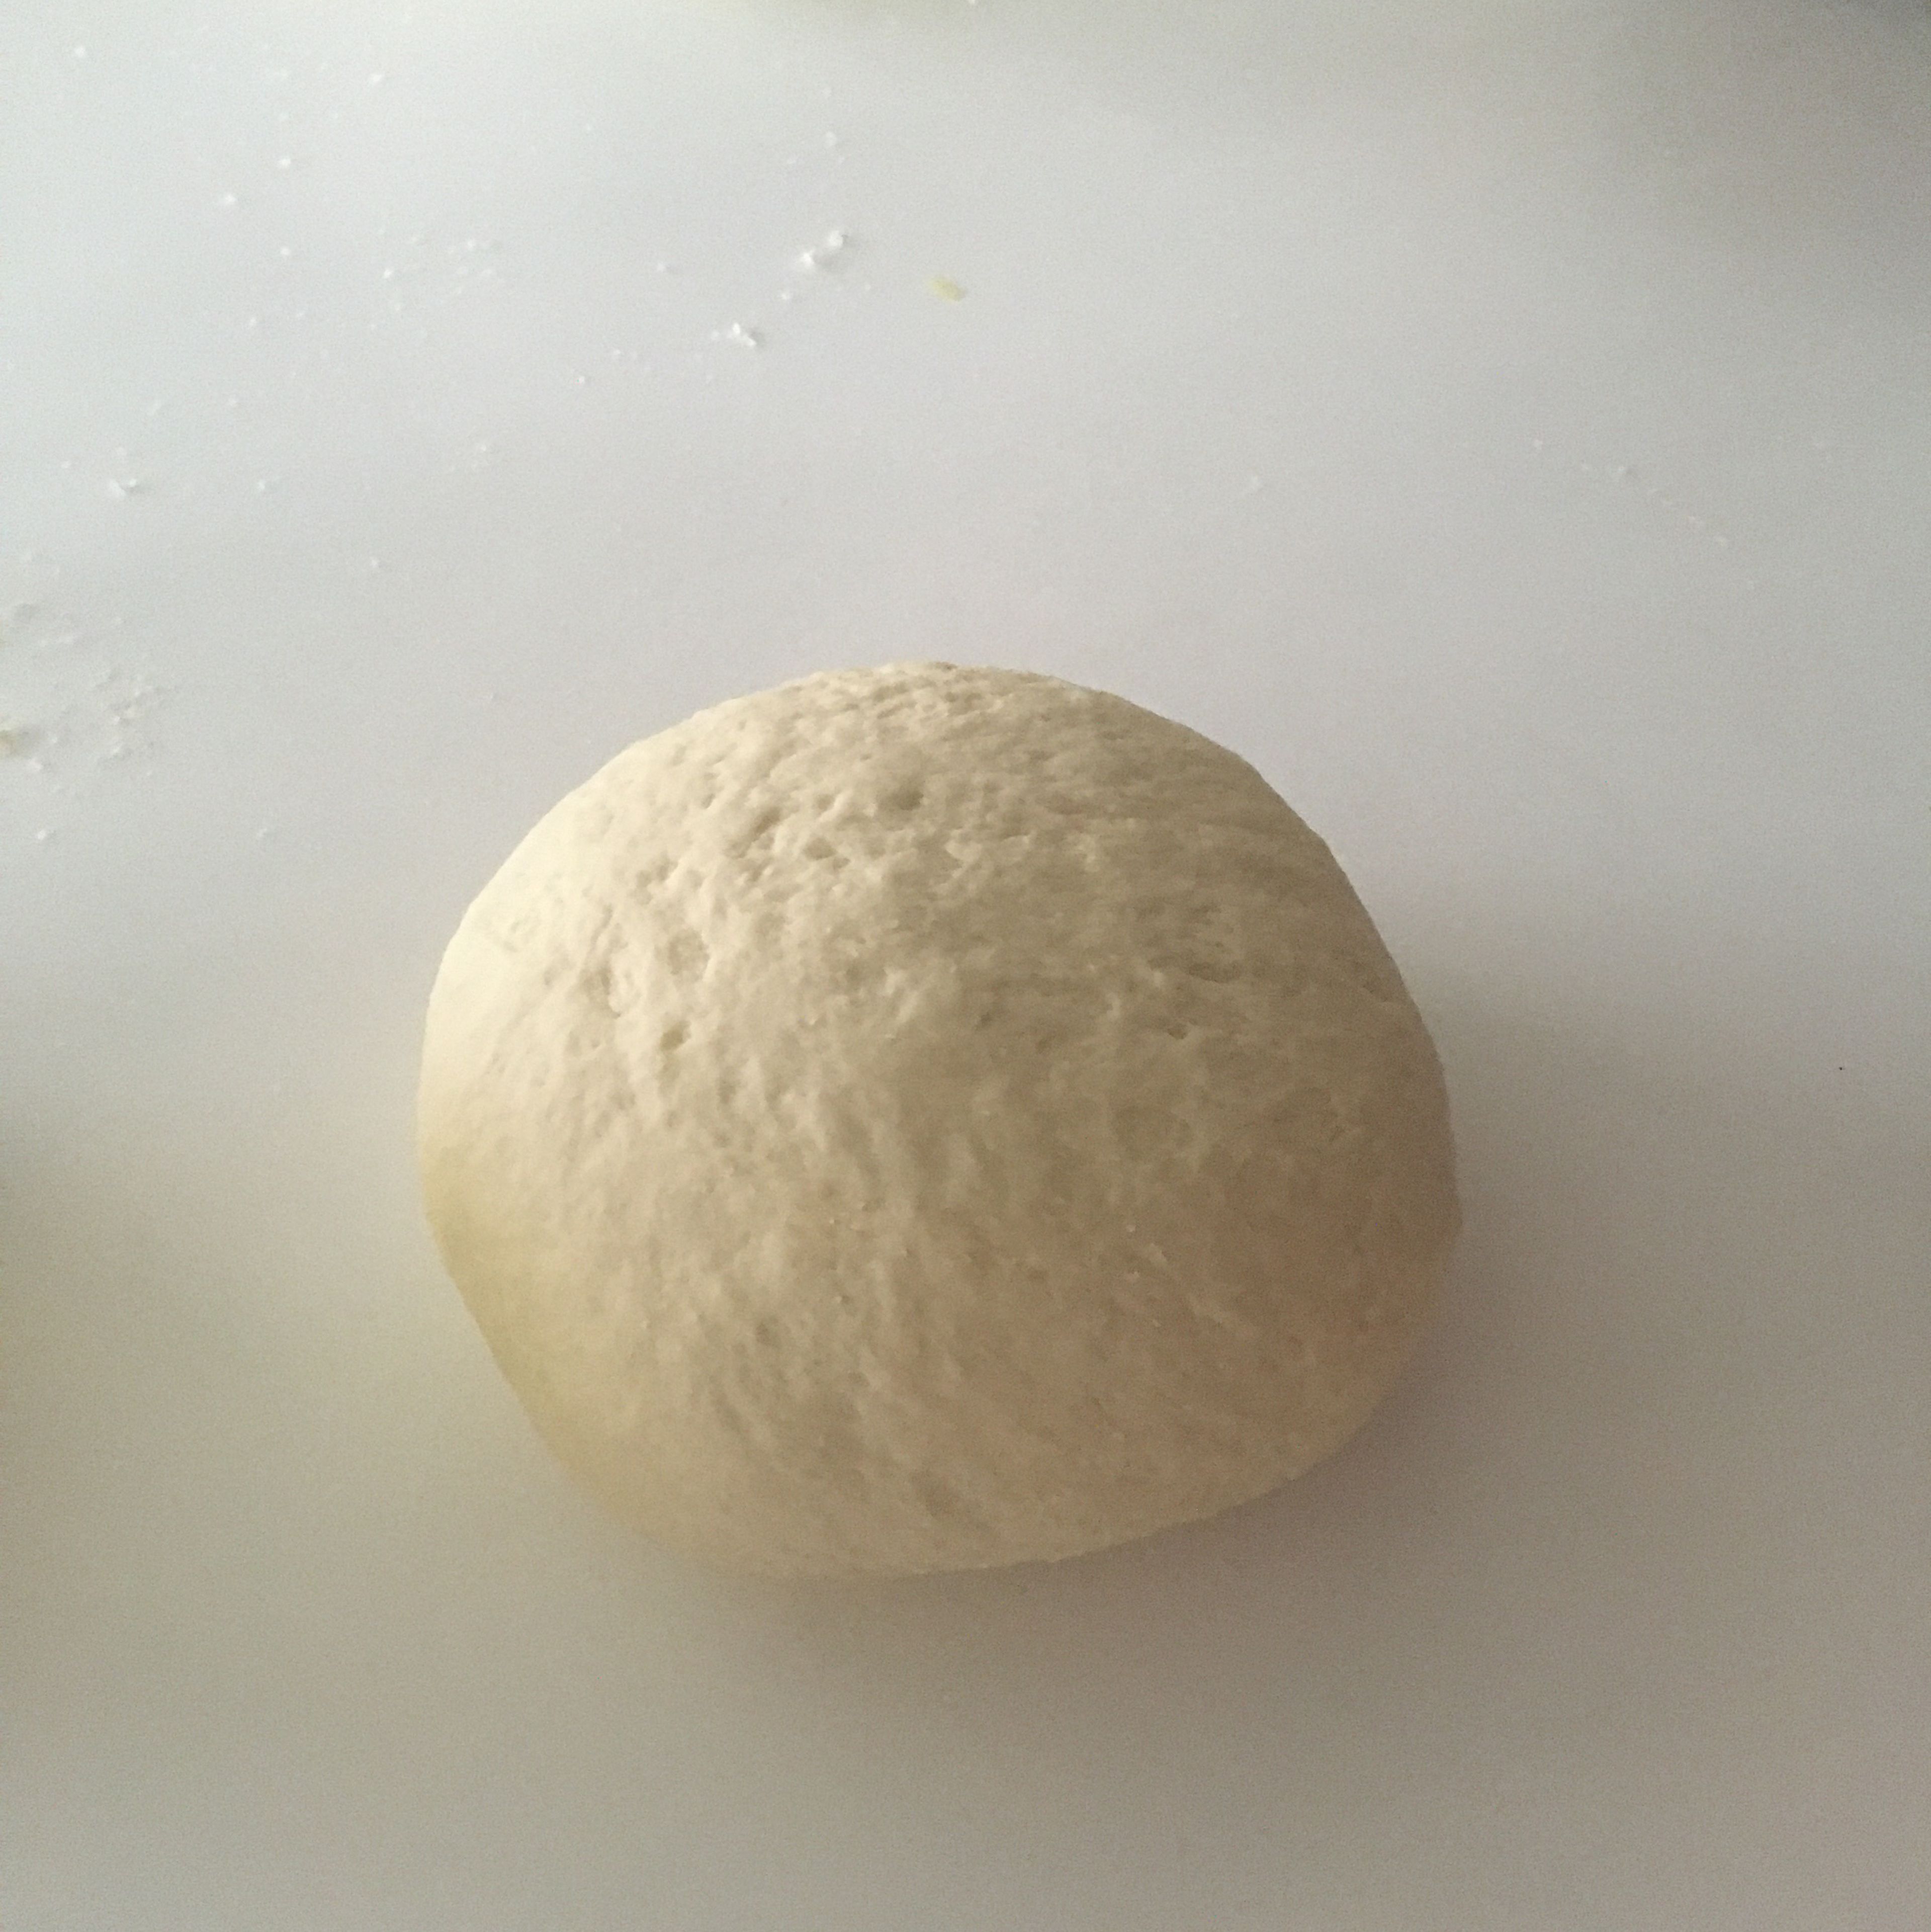 Knead the dough until you get a nice circular shape, with a sticky but firm consistency